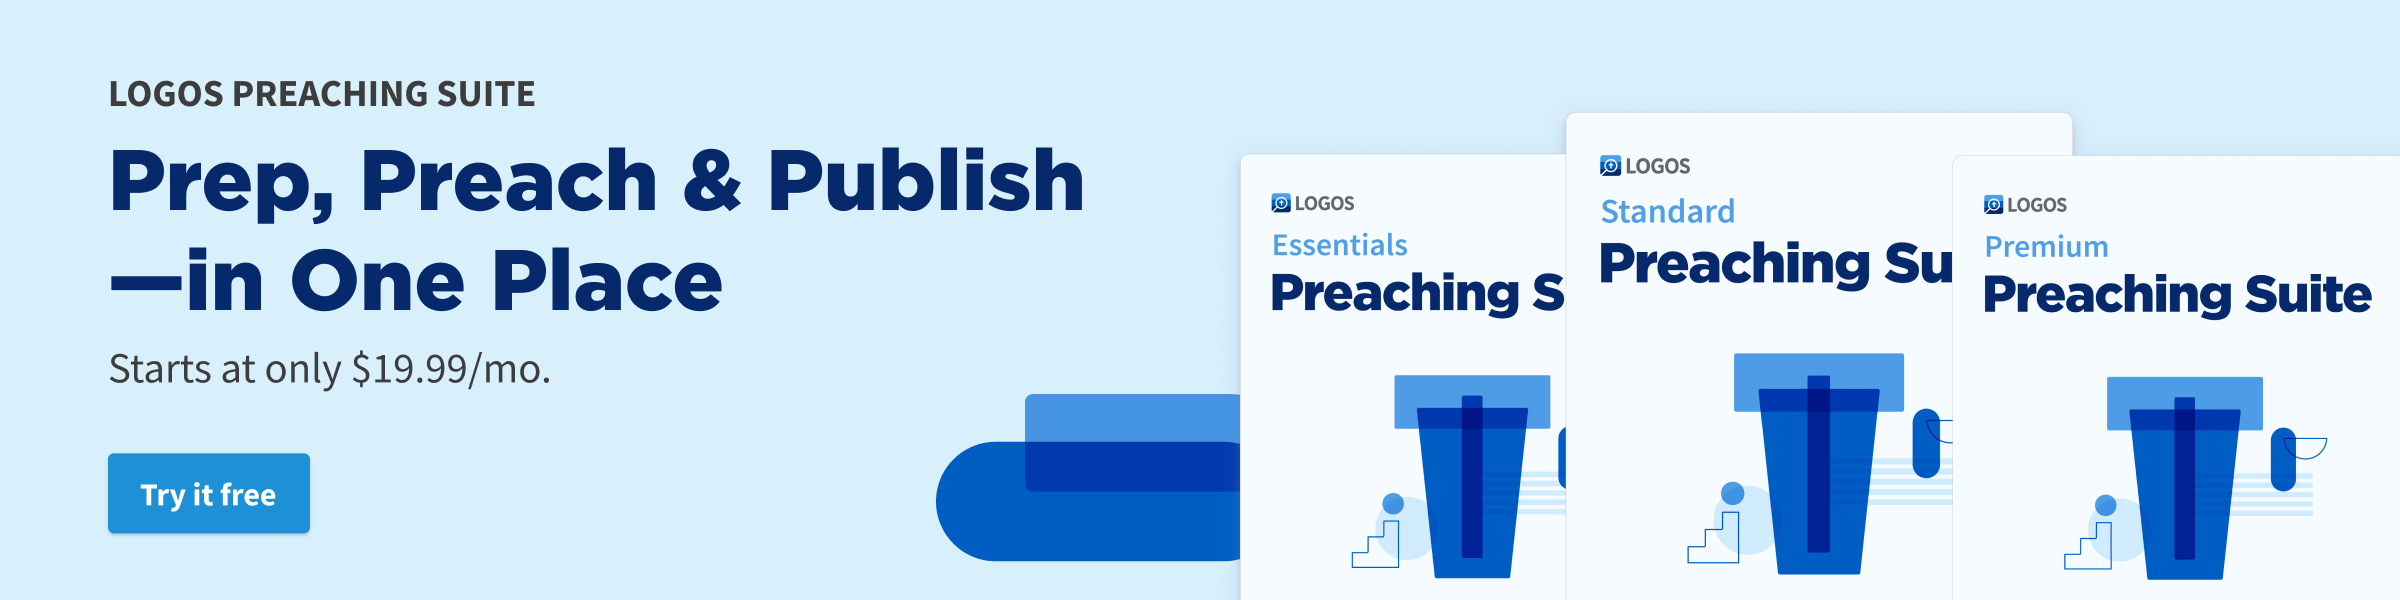 Logos Preaching Suite: Prep, Preach & Publish—in One Place. Starts at only $19.99/mo. Try it free